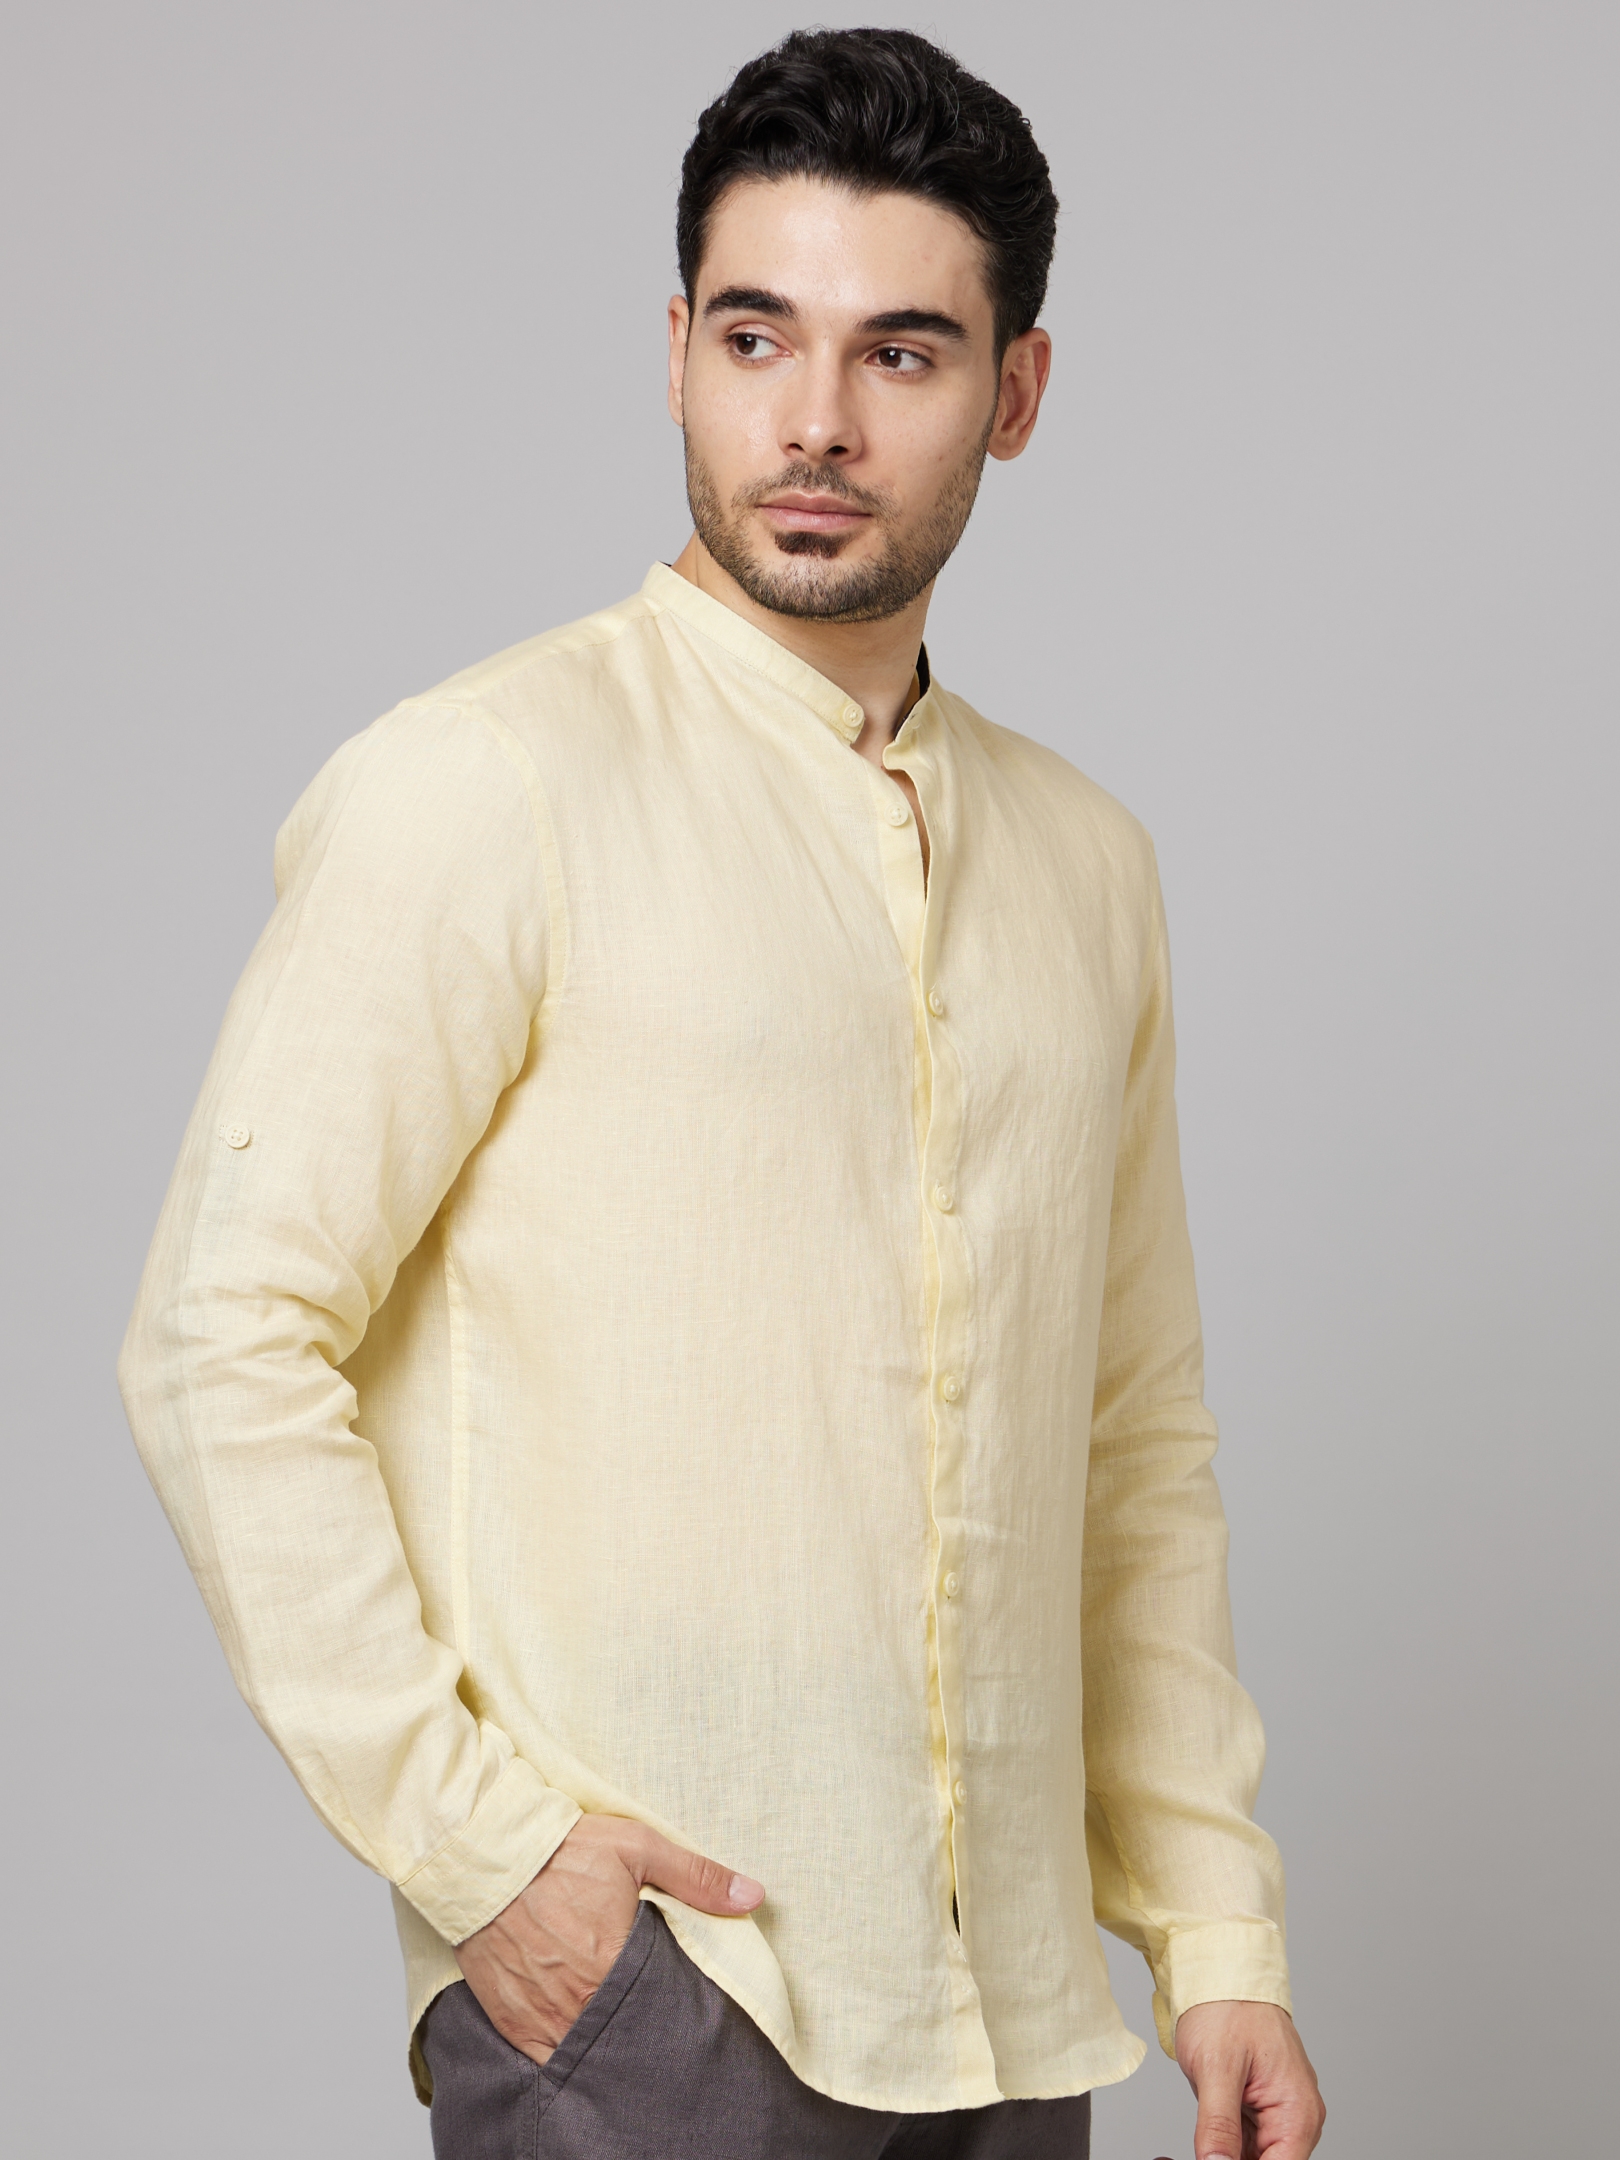 Men's Yellow Solid Casual Shirts